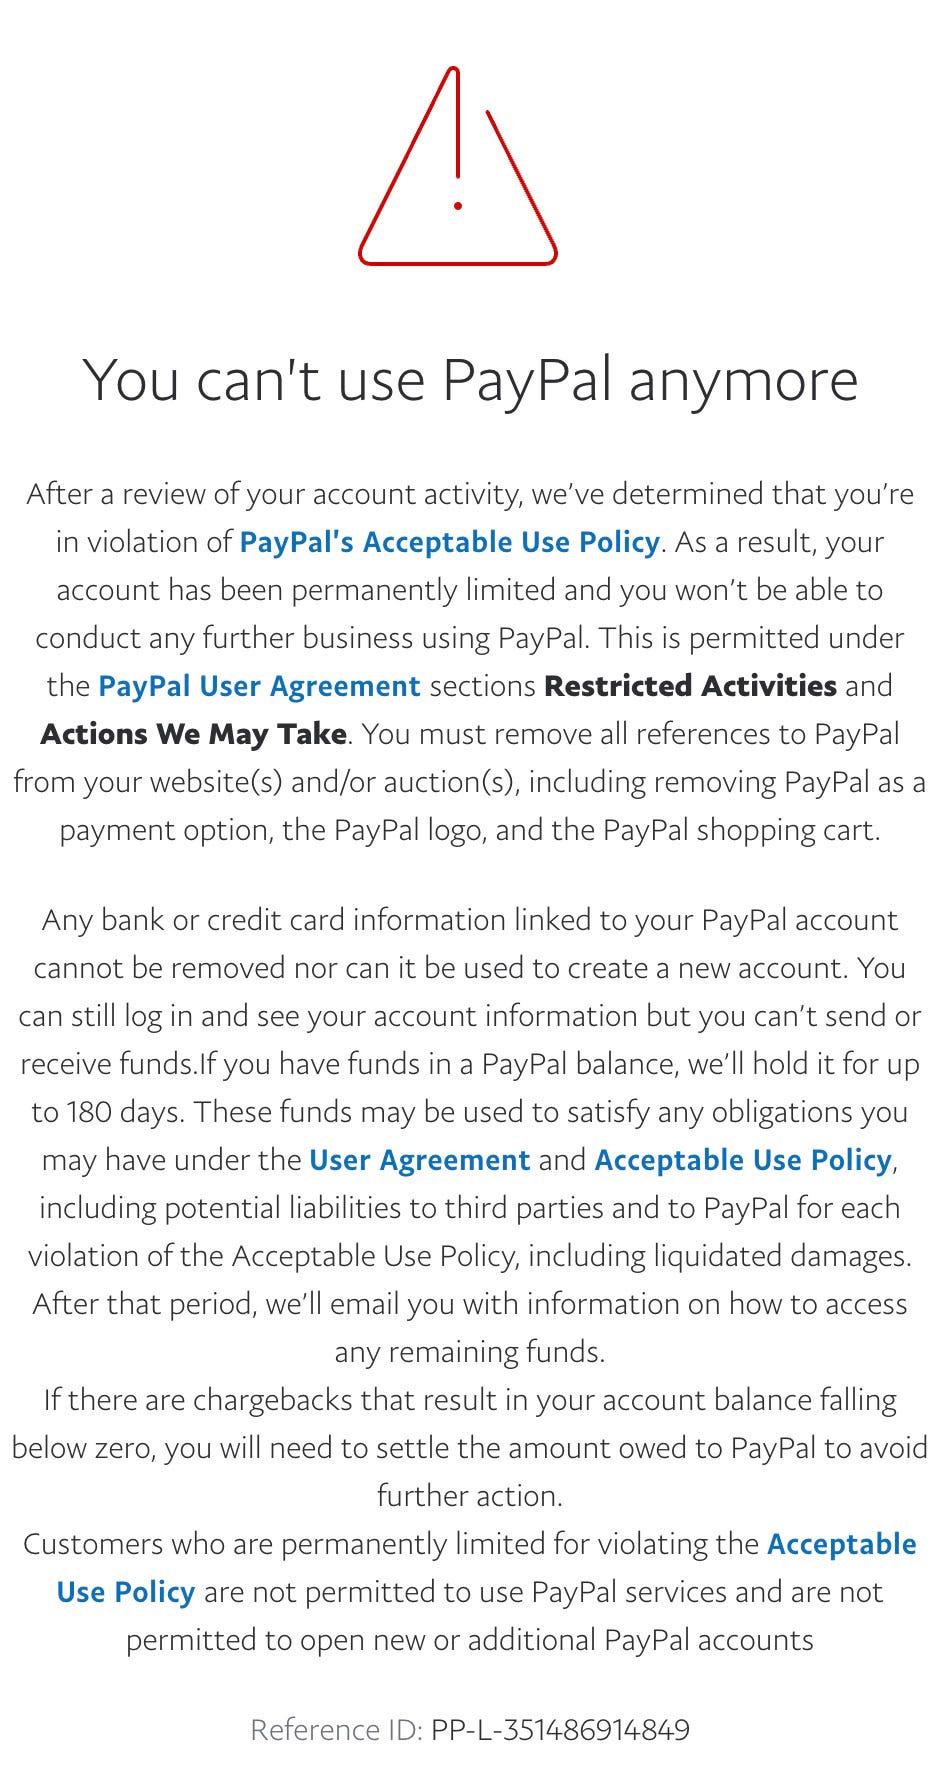 PayPal: You Can't Use This Account Anymore